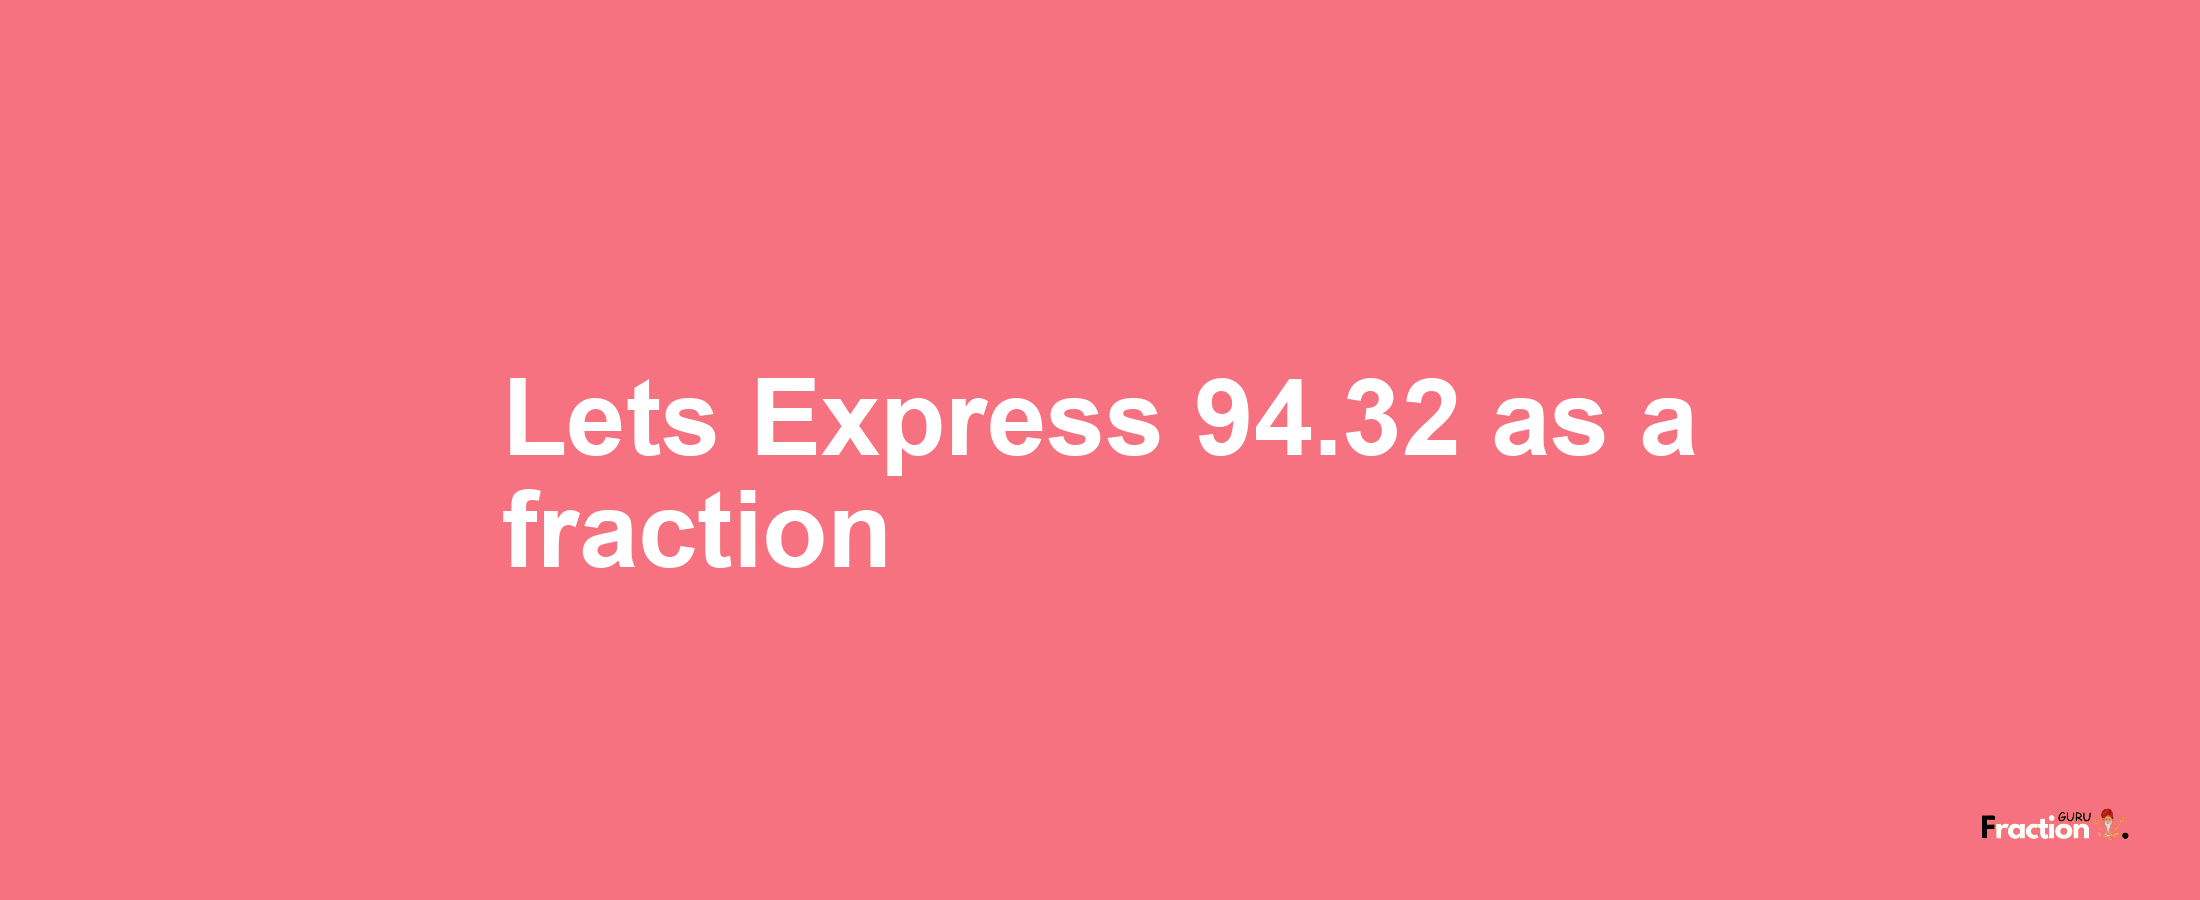 Lets Express 94.32 as afraction